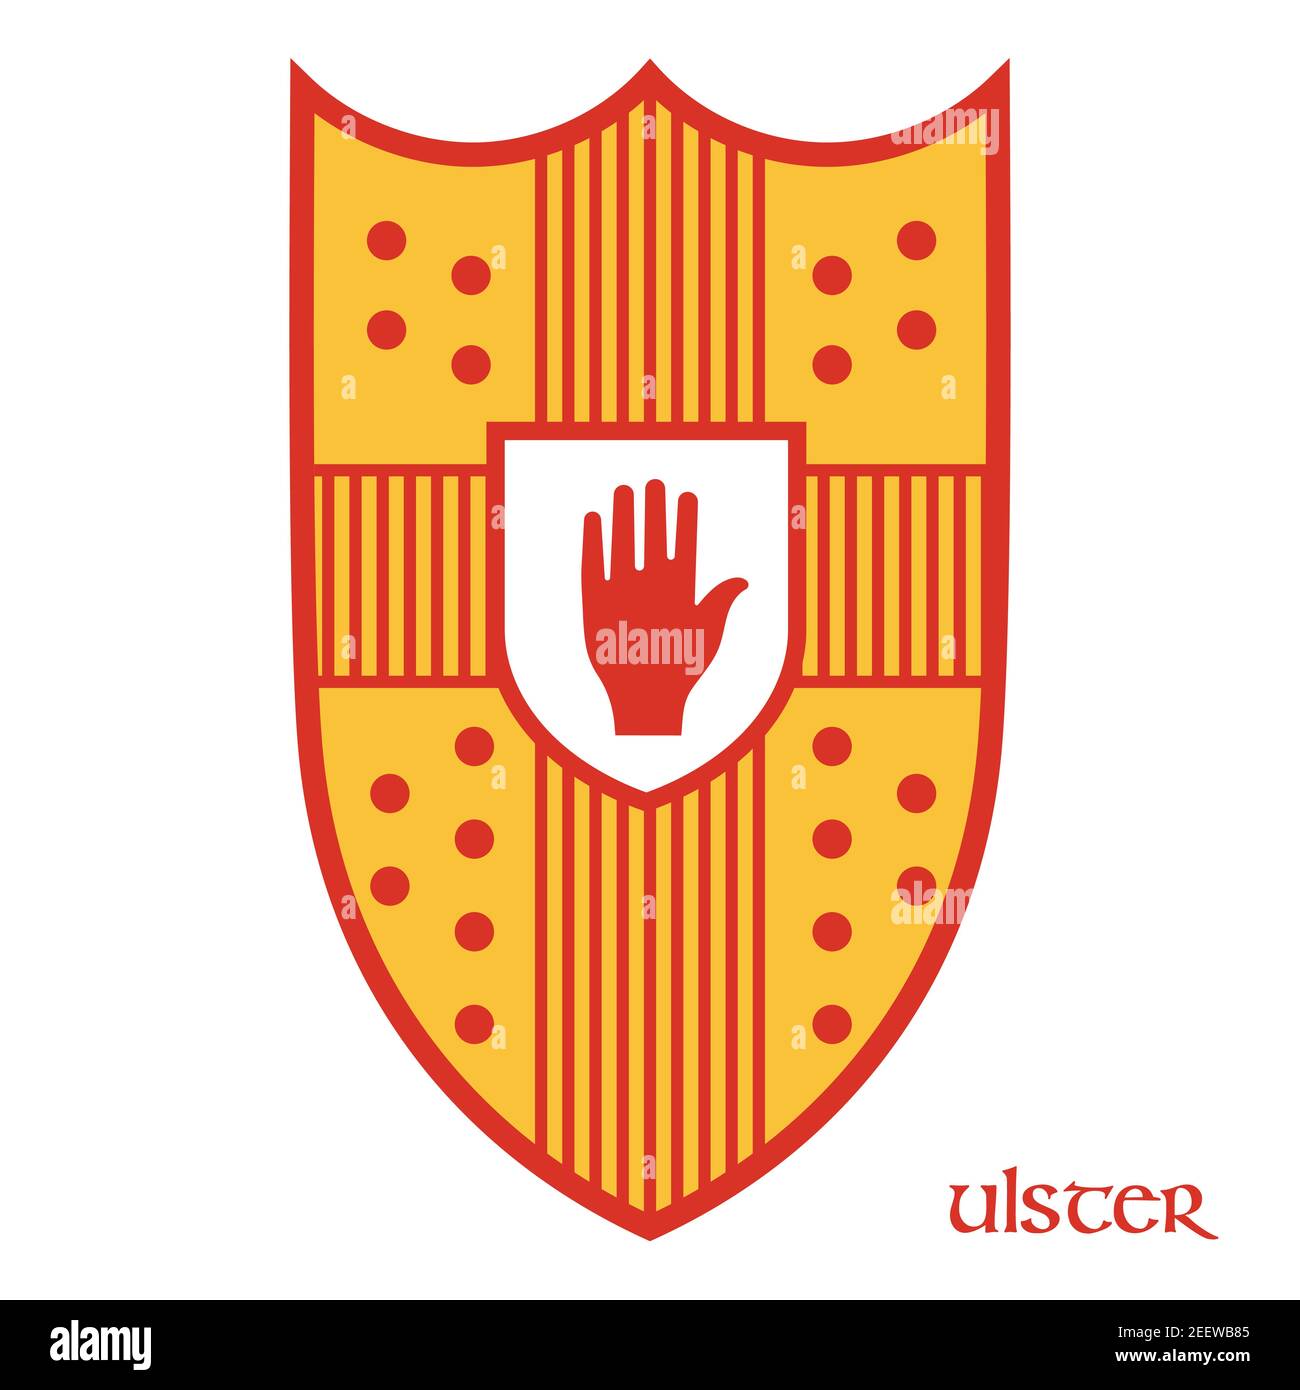 Irish Celtic design in vintage, retro style. Irish design with coat of arms of the province of Ulster Stock Vector